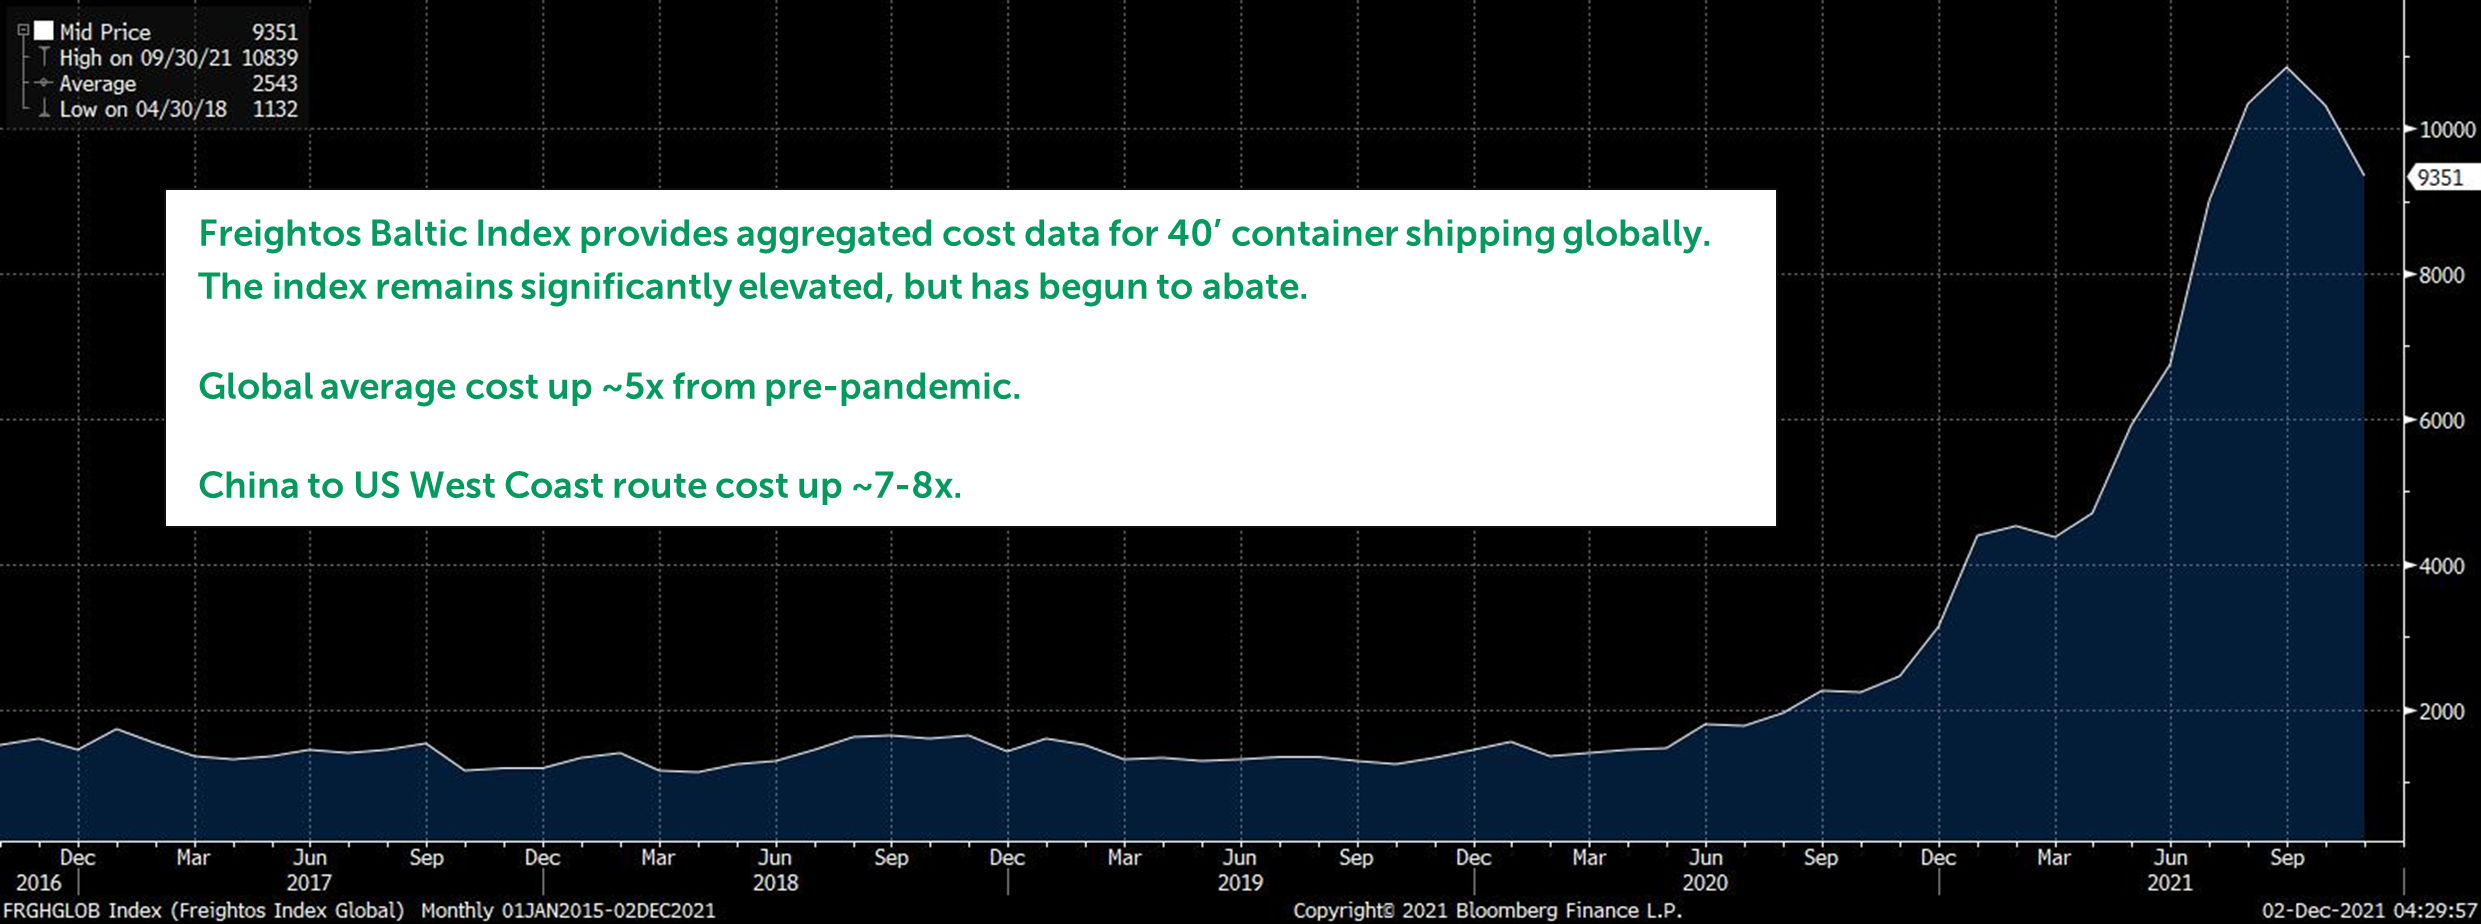 Line graph depicting the Freightos Baltic Index from 2016 to September 2021, with text reading: Freightos Baltic Index provides aggregated cost data for 40’ container shipping globally. The index remains significantly elevated, but has begun to abate. Global average cost up ~5x from pre-pandemic. China to US West Coast route cost up ~7-8x.